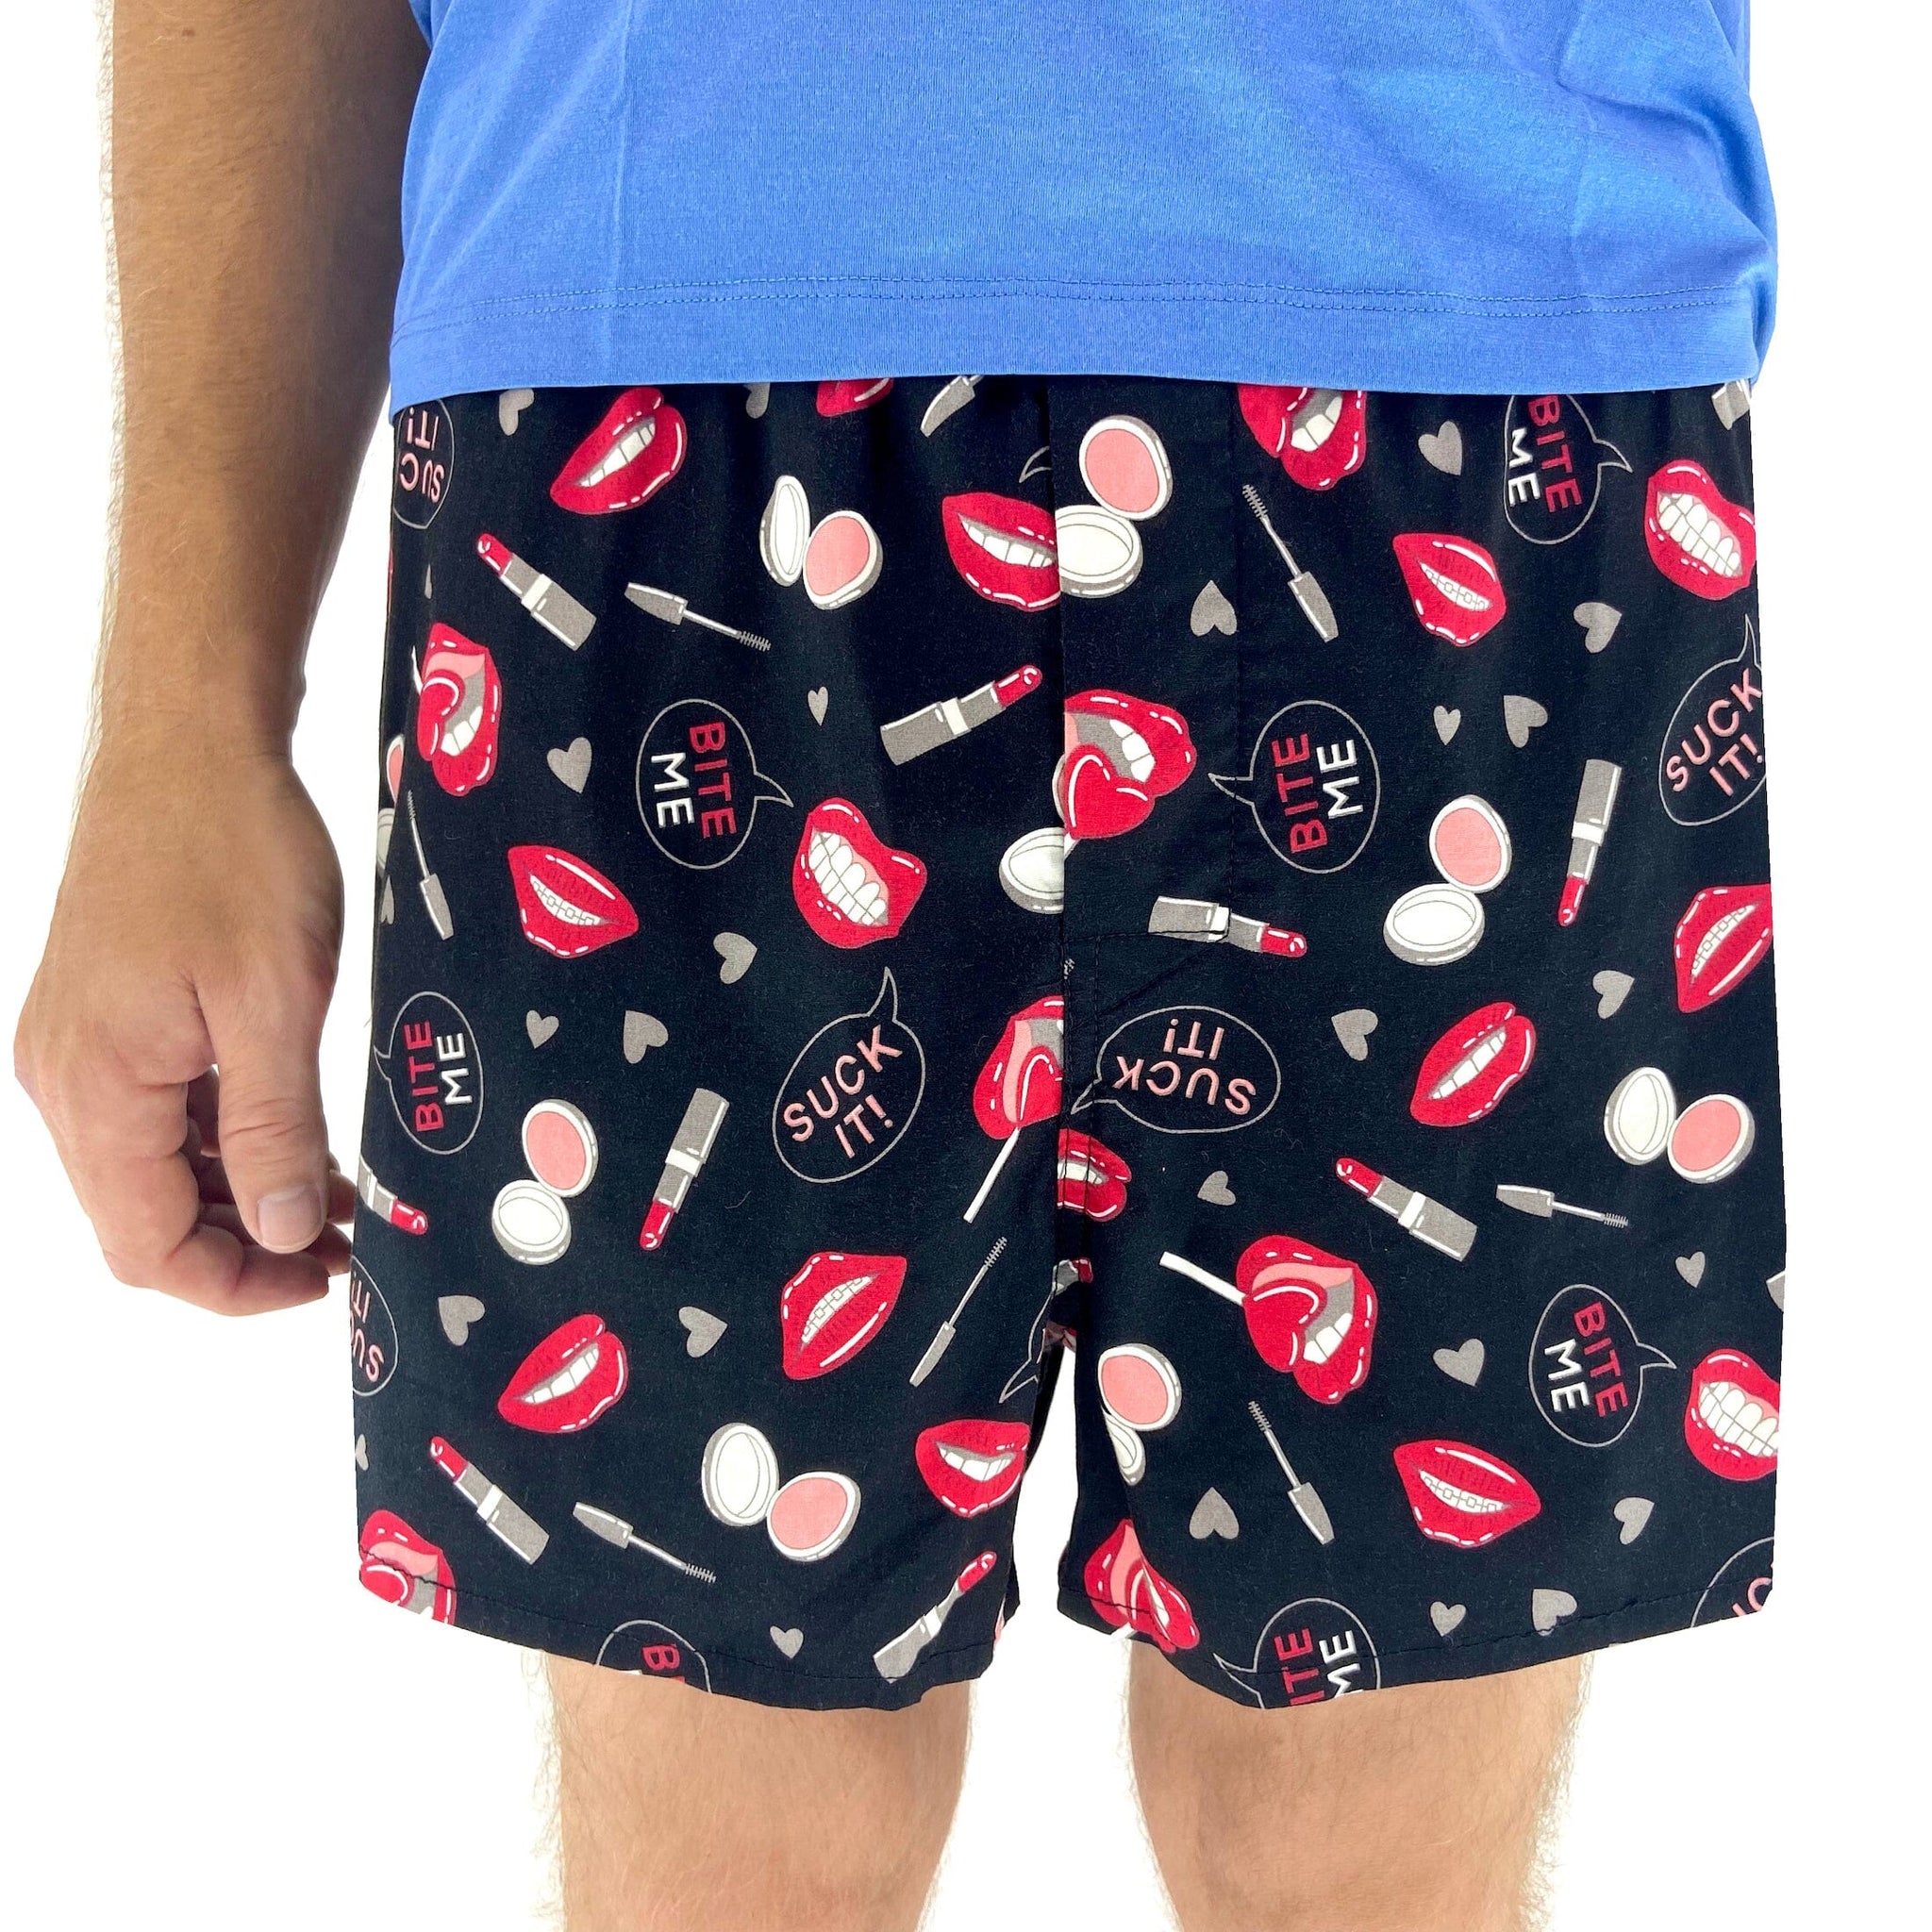 Cotton Trunk Shorts for Women, Orders $75+ Ship Free